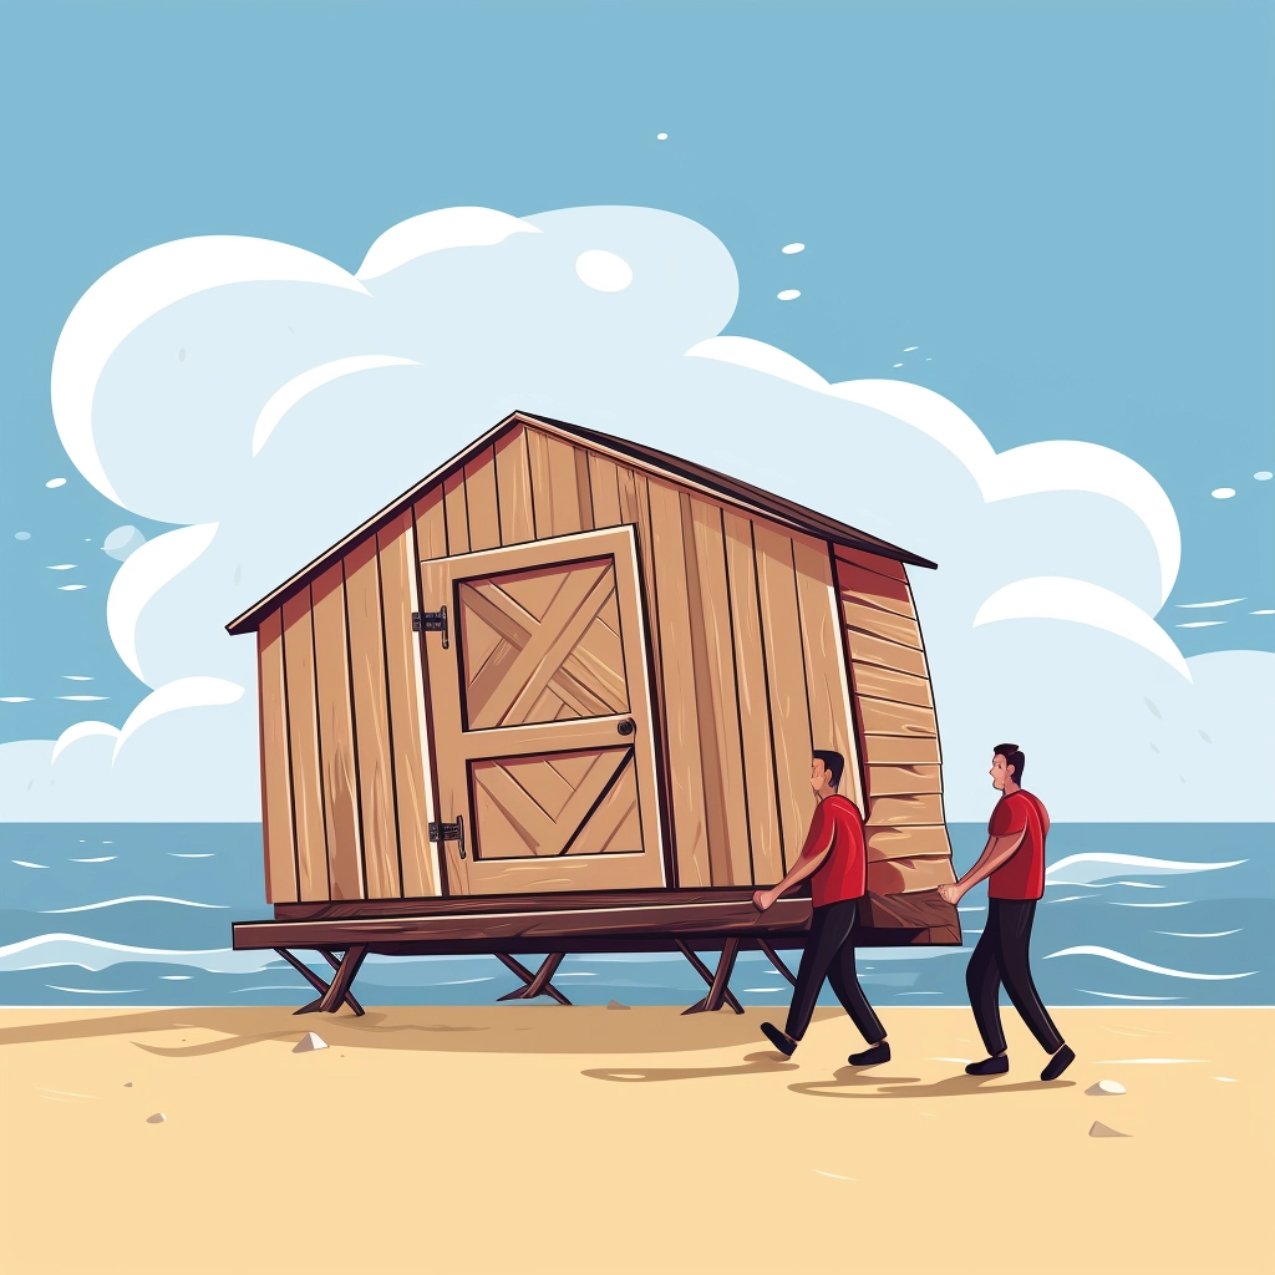 Two guys carrying barn door shed by Beach.jpg